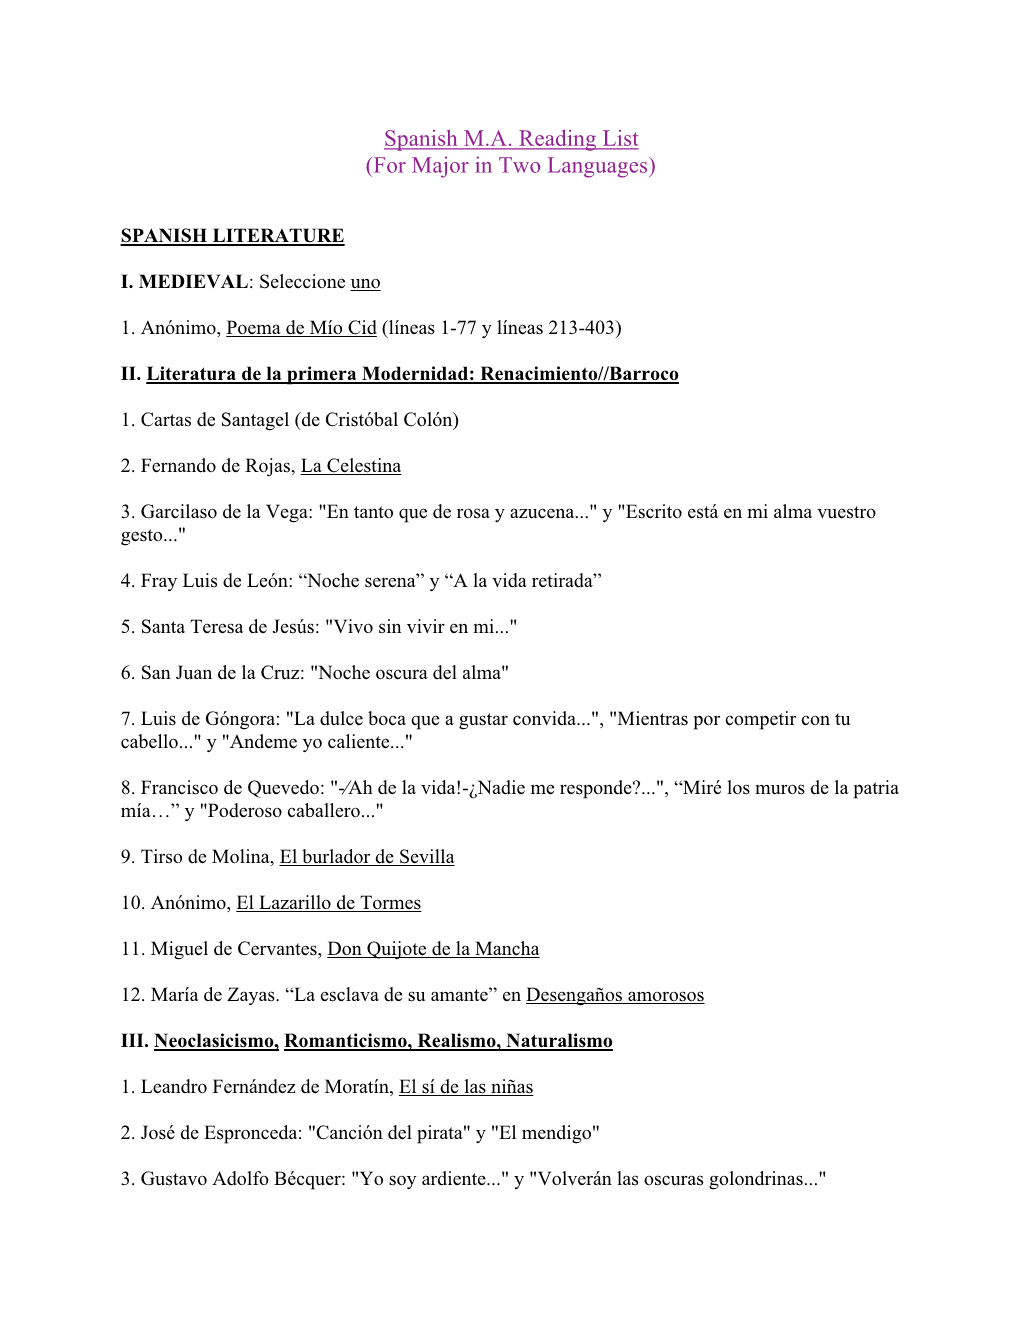 Spanish M.A. Reading List (For Major in Two Languages)